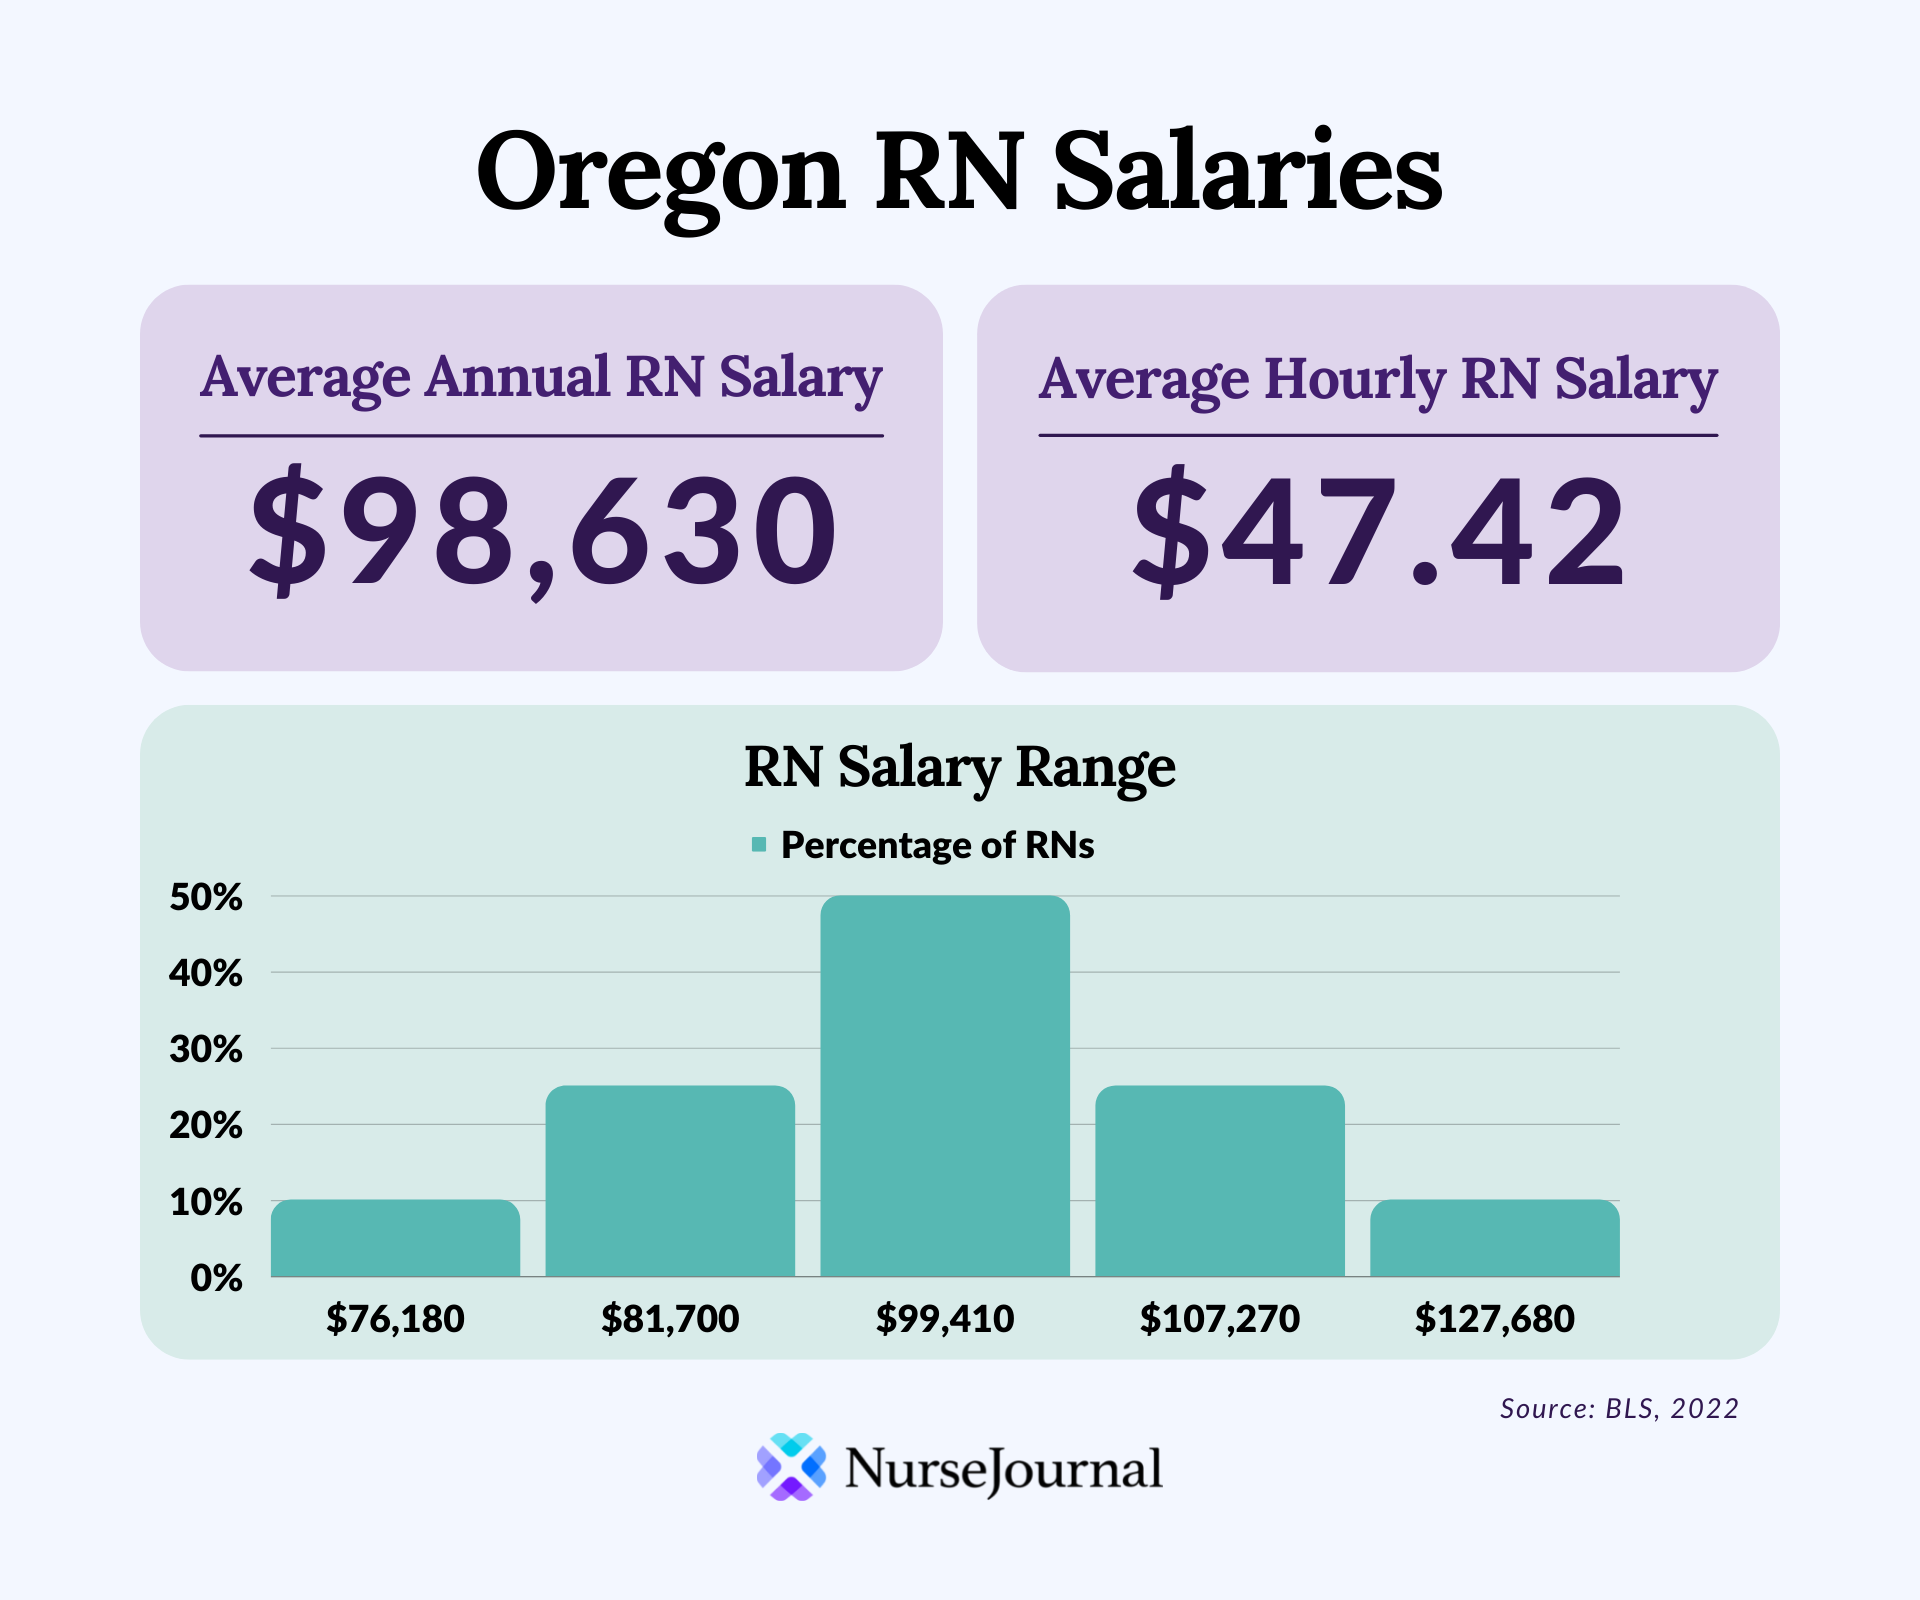 Infographic of registered nursing salary data in Oregon. The average annual RN salary is $98,630. The average hourly RN salary is $47.42. Average RN salaries range from $76,180 among the bottom 10th percentile of earners to $127,680 among the top 90th percentile of earners.